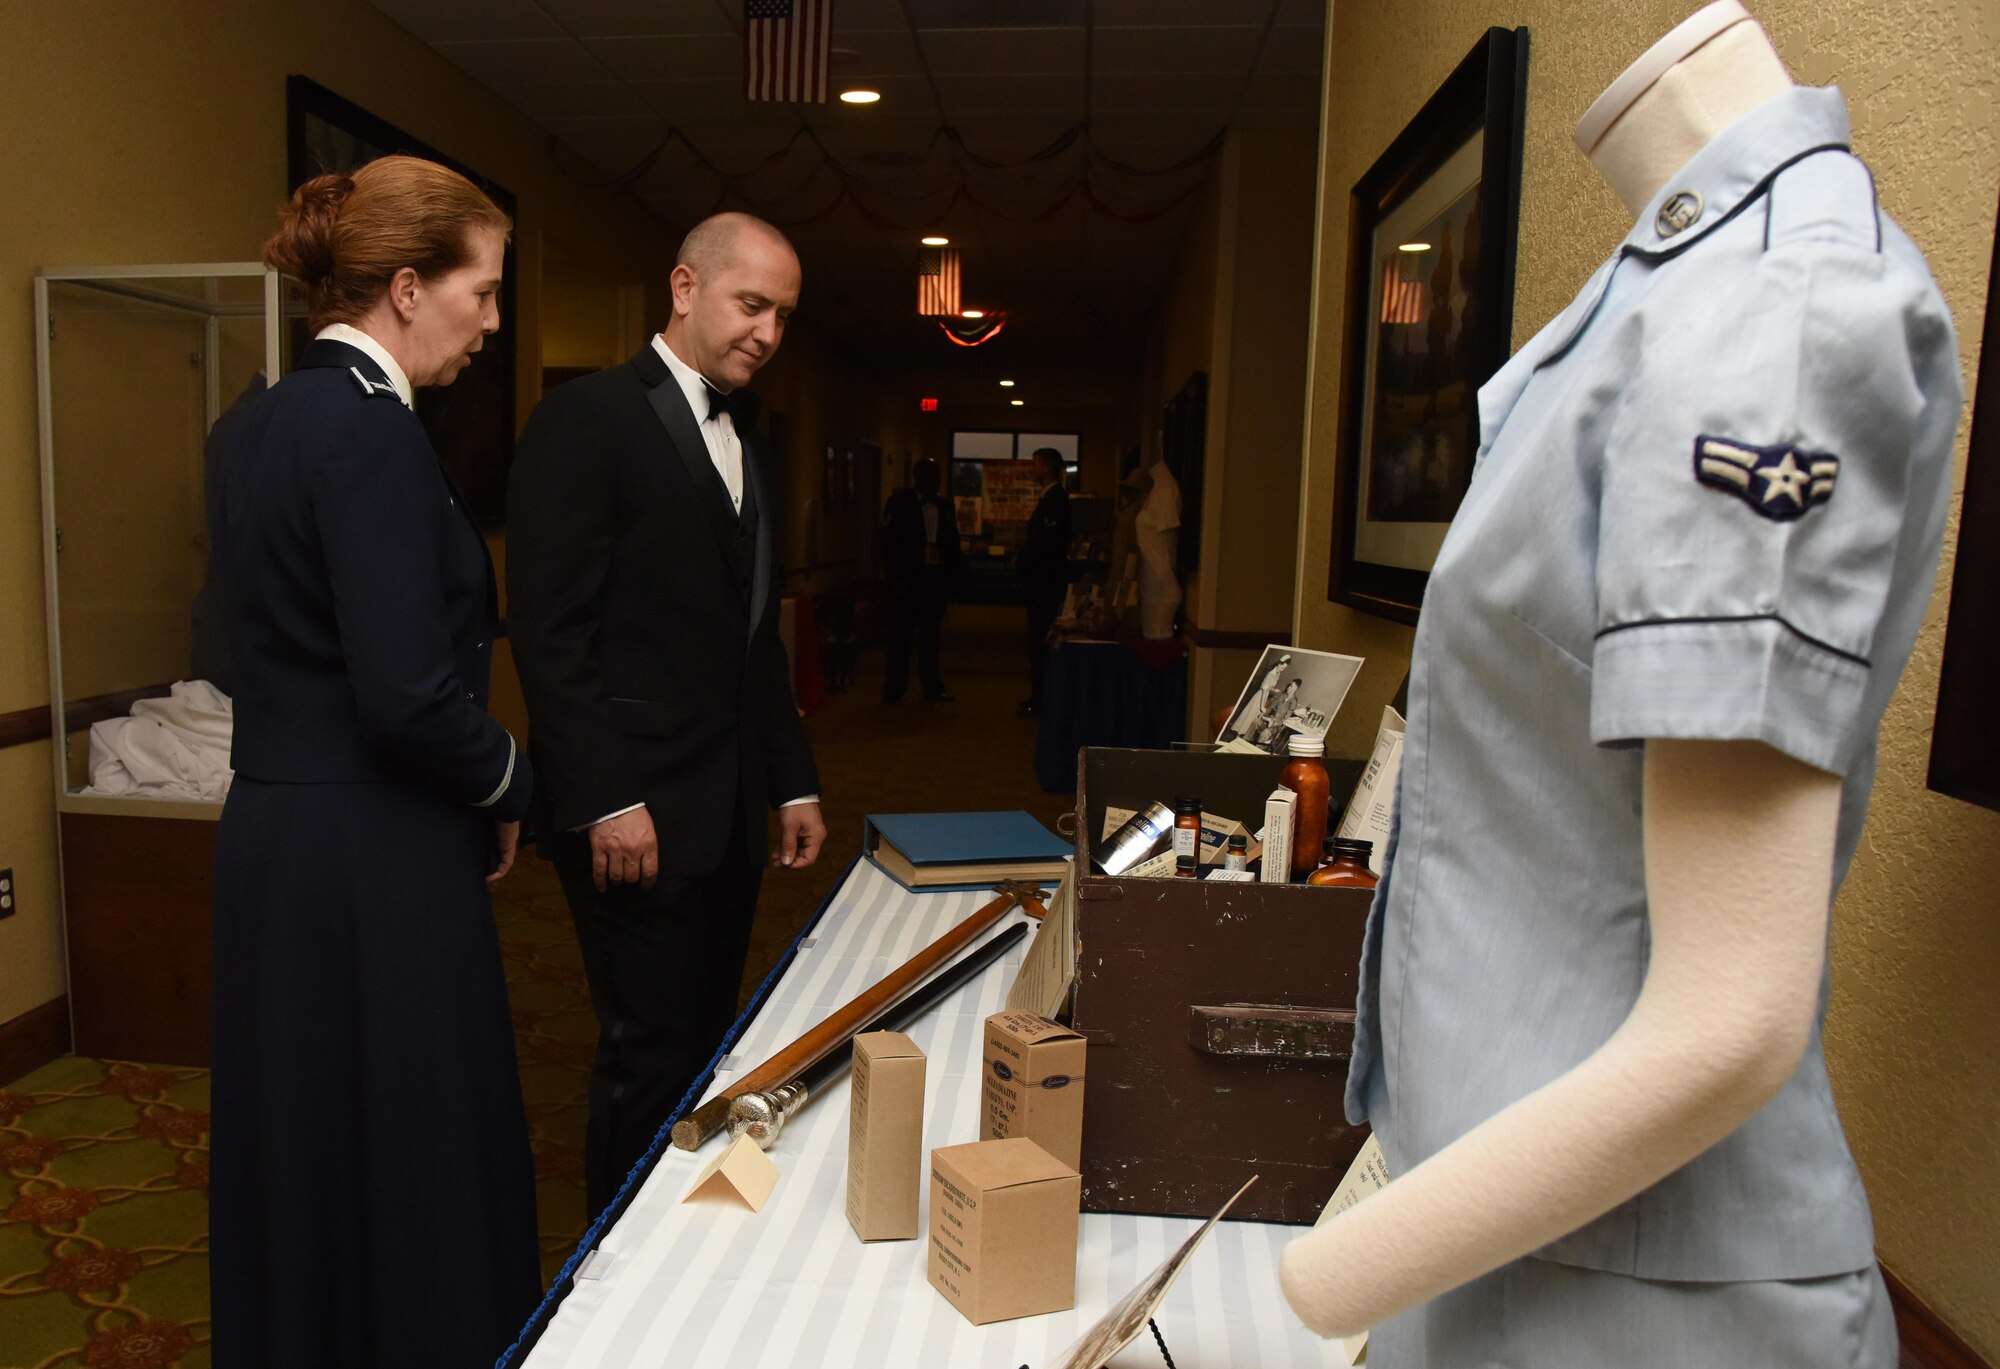 Col. Maureen Harback, 81st Diagnostic and Therapeutics Squadron commander, and her husband, Greg, view historical displays at the Bay Breeze Event Center during the installation’s 75th Anniversary Gala Nov. 4, 2016, on Keesler Air Force Base, Miss. The celebration commemorated Keesler’s 75 years of history with historical displays, throwback trivia, musical and dance performances and recognition of family members of Lt. Samuel Keesler, Jr. (U.S. Air Force photo by Kemberly Groue/Released)